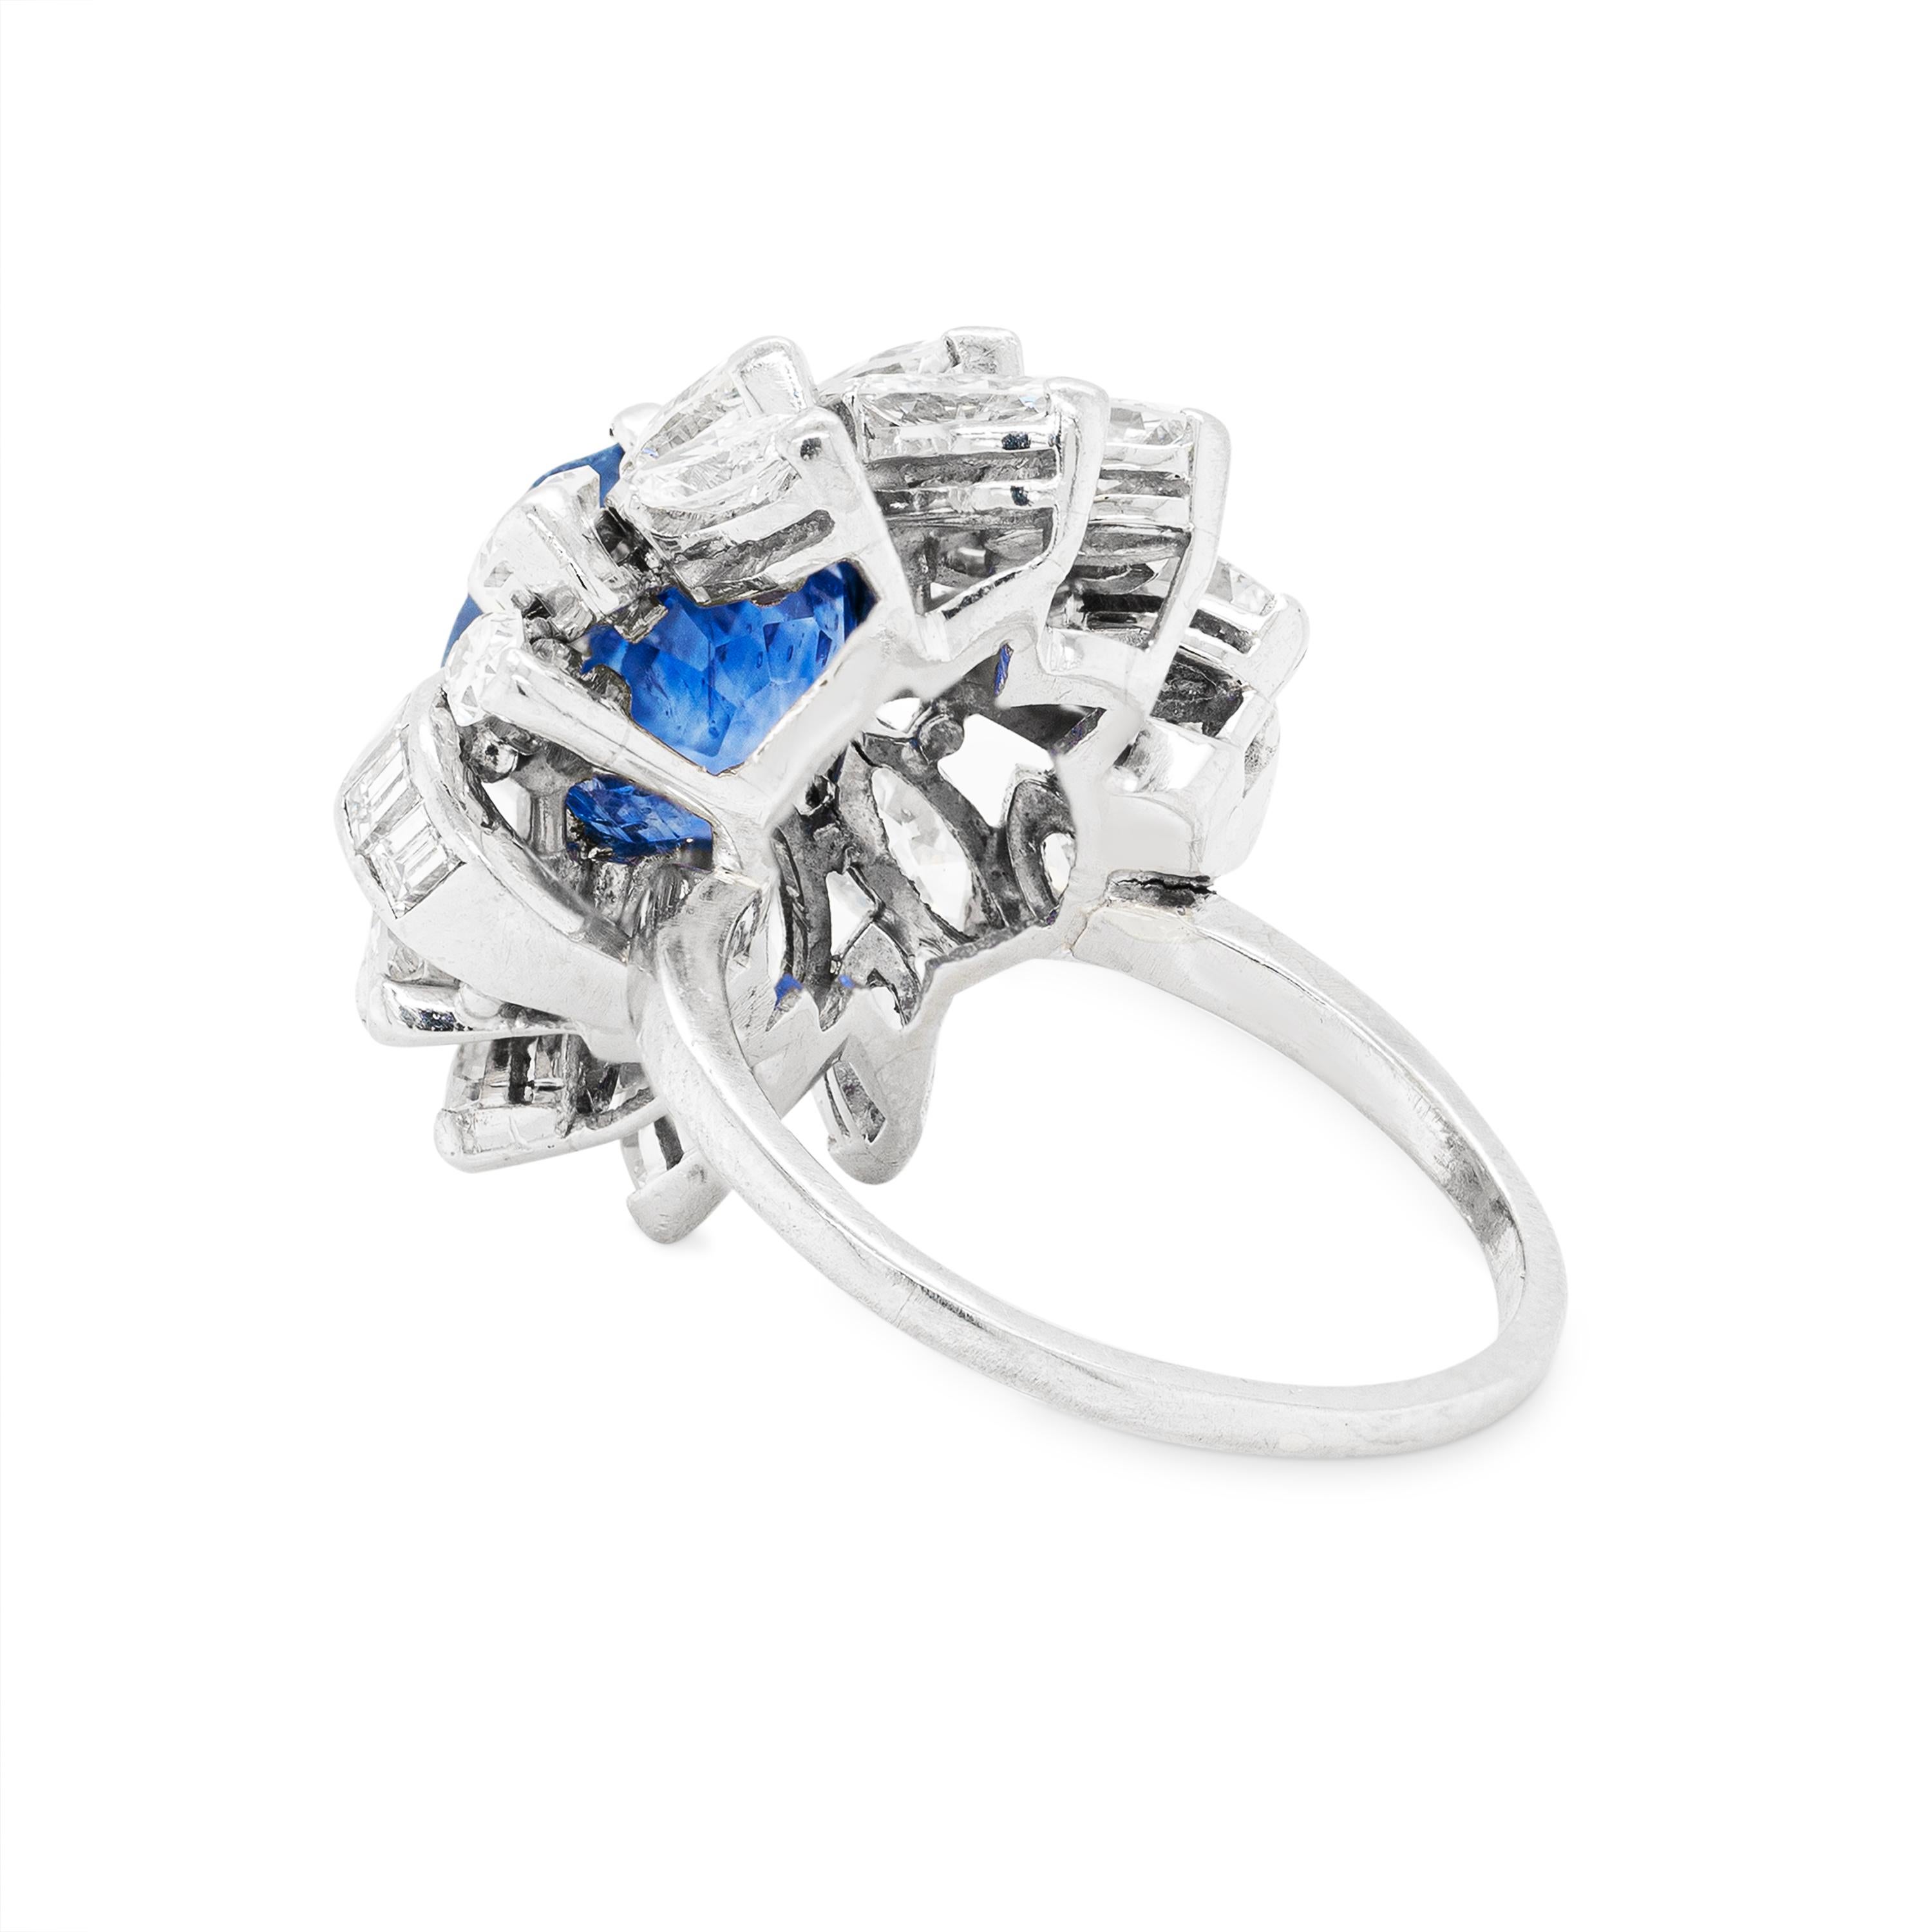 This gorgeous platinum cocktail cluster ring features a beautiful hexagonal step-cut blue sapphire weighing 5.06ct, in a six claw, open back setting. The vibrant gemstone is highlighted by 18 claw set marquise cut diamonds that beautifully complete